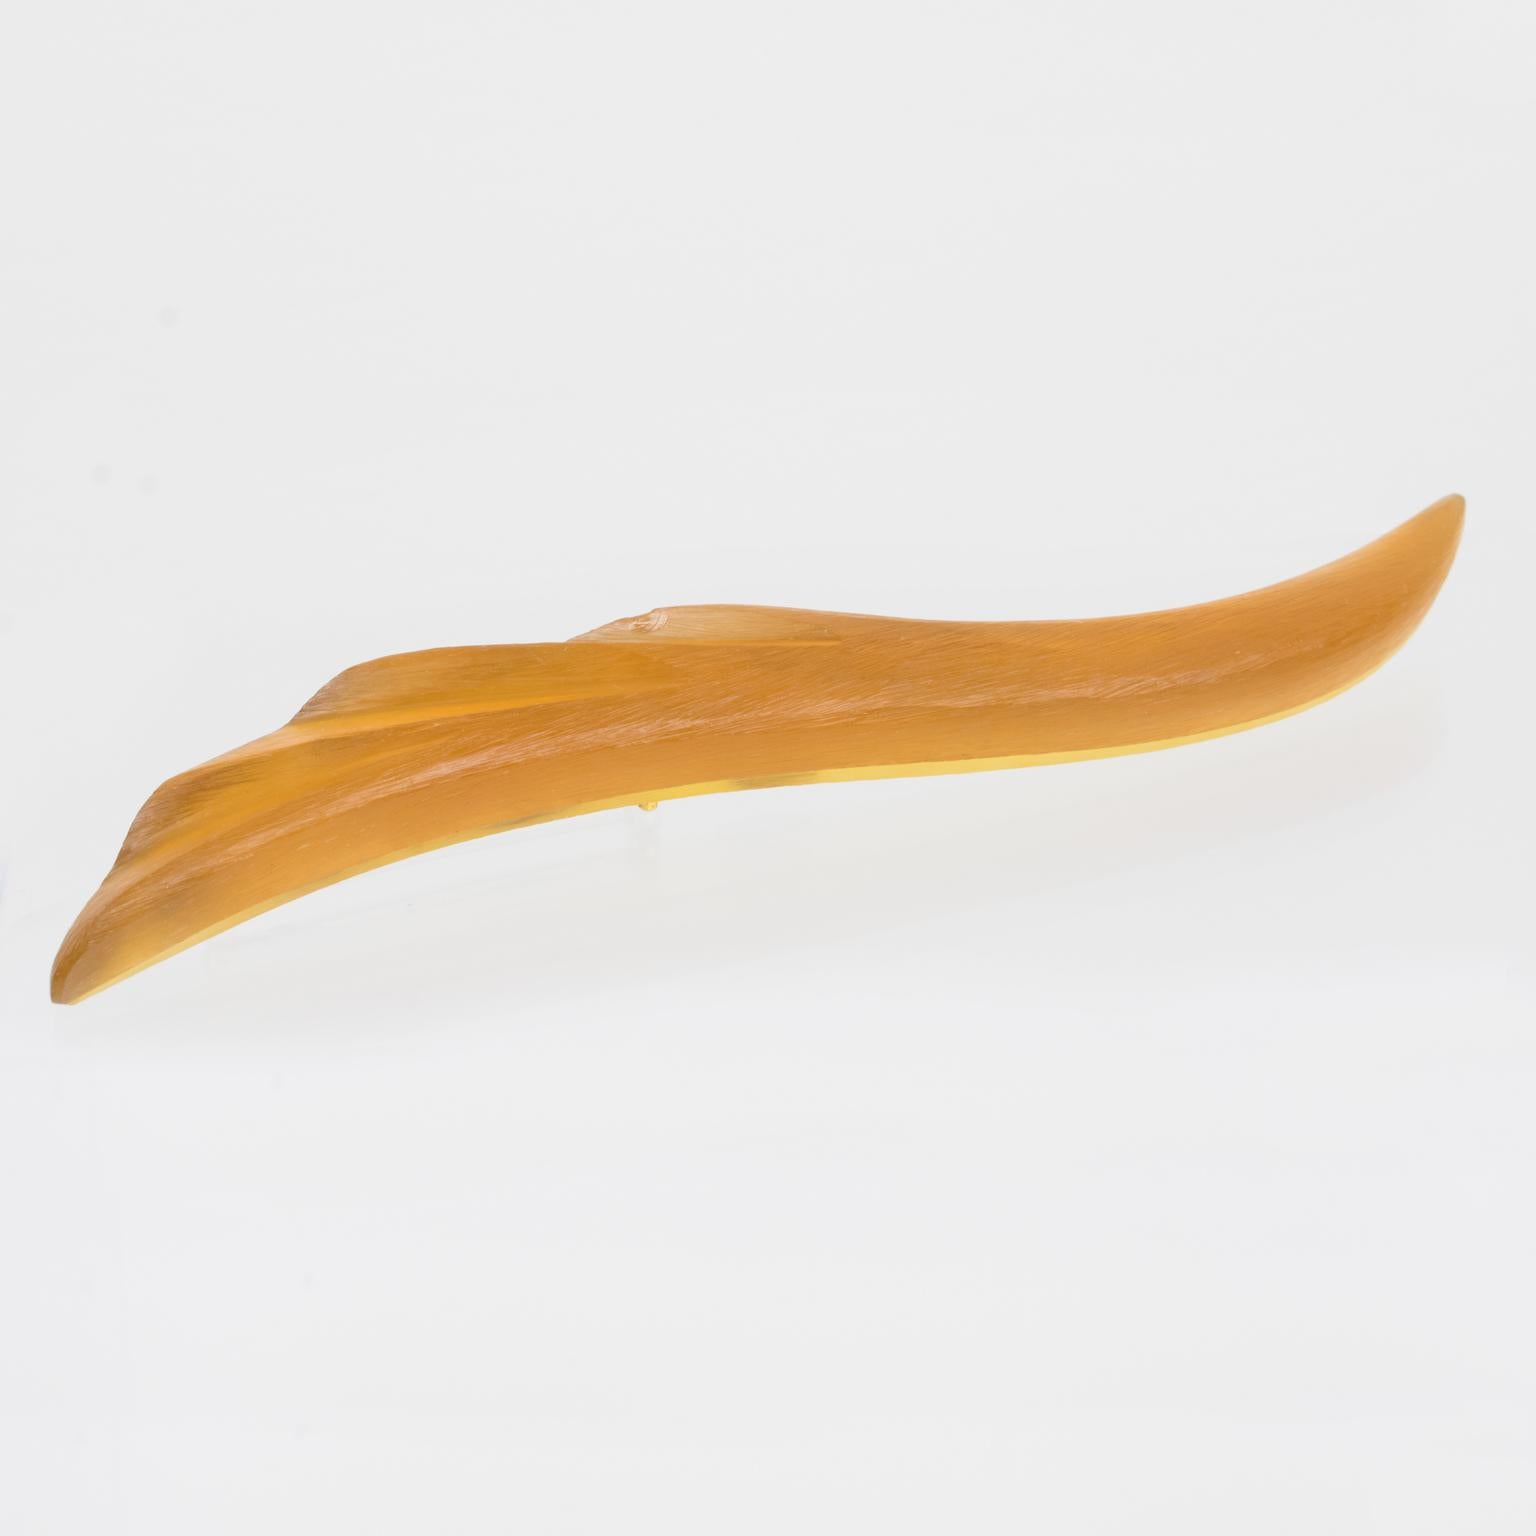 Migeon and Migeon Paris Oversized Orange Resin Pin Brooch For Sale 2